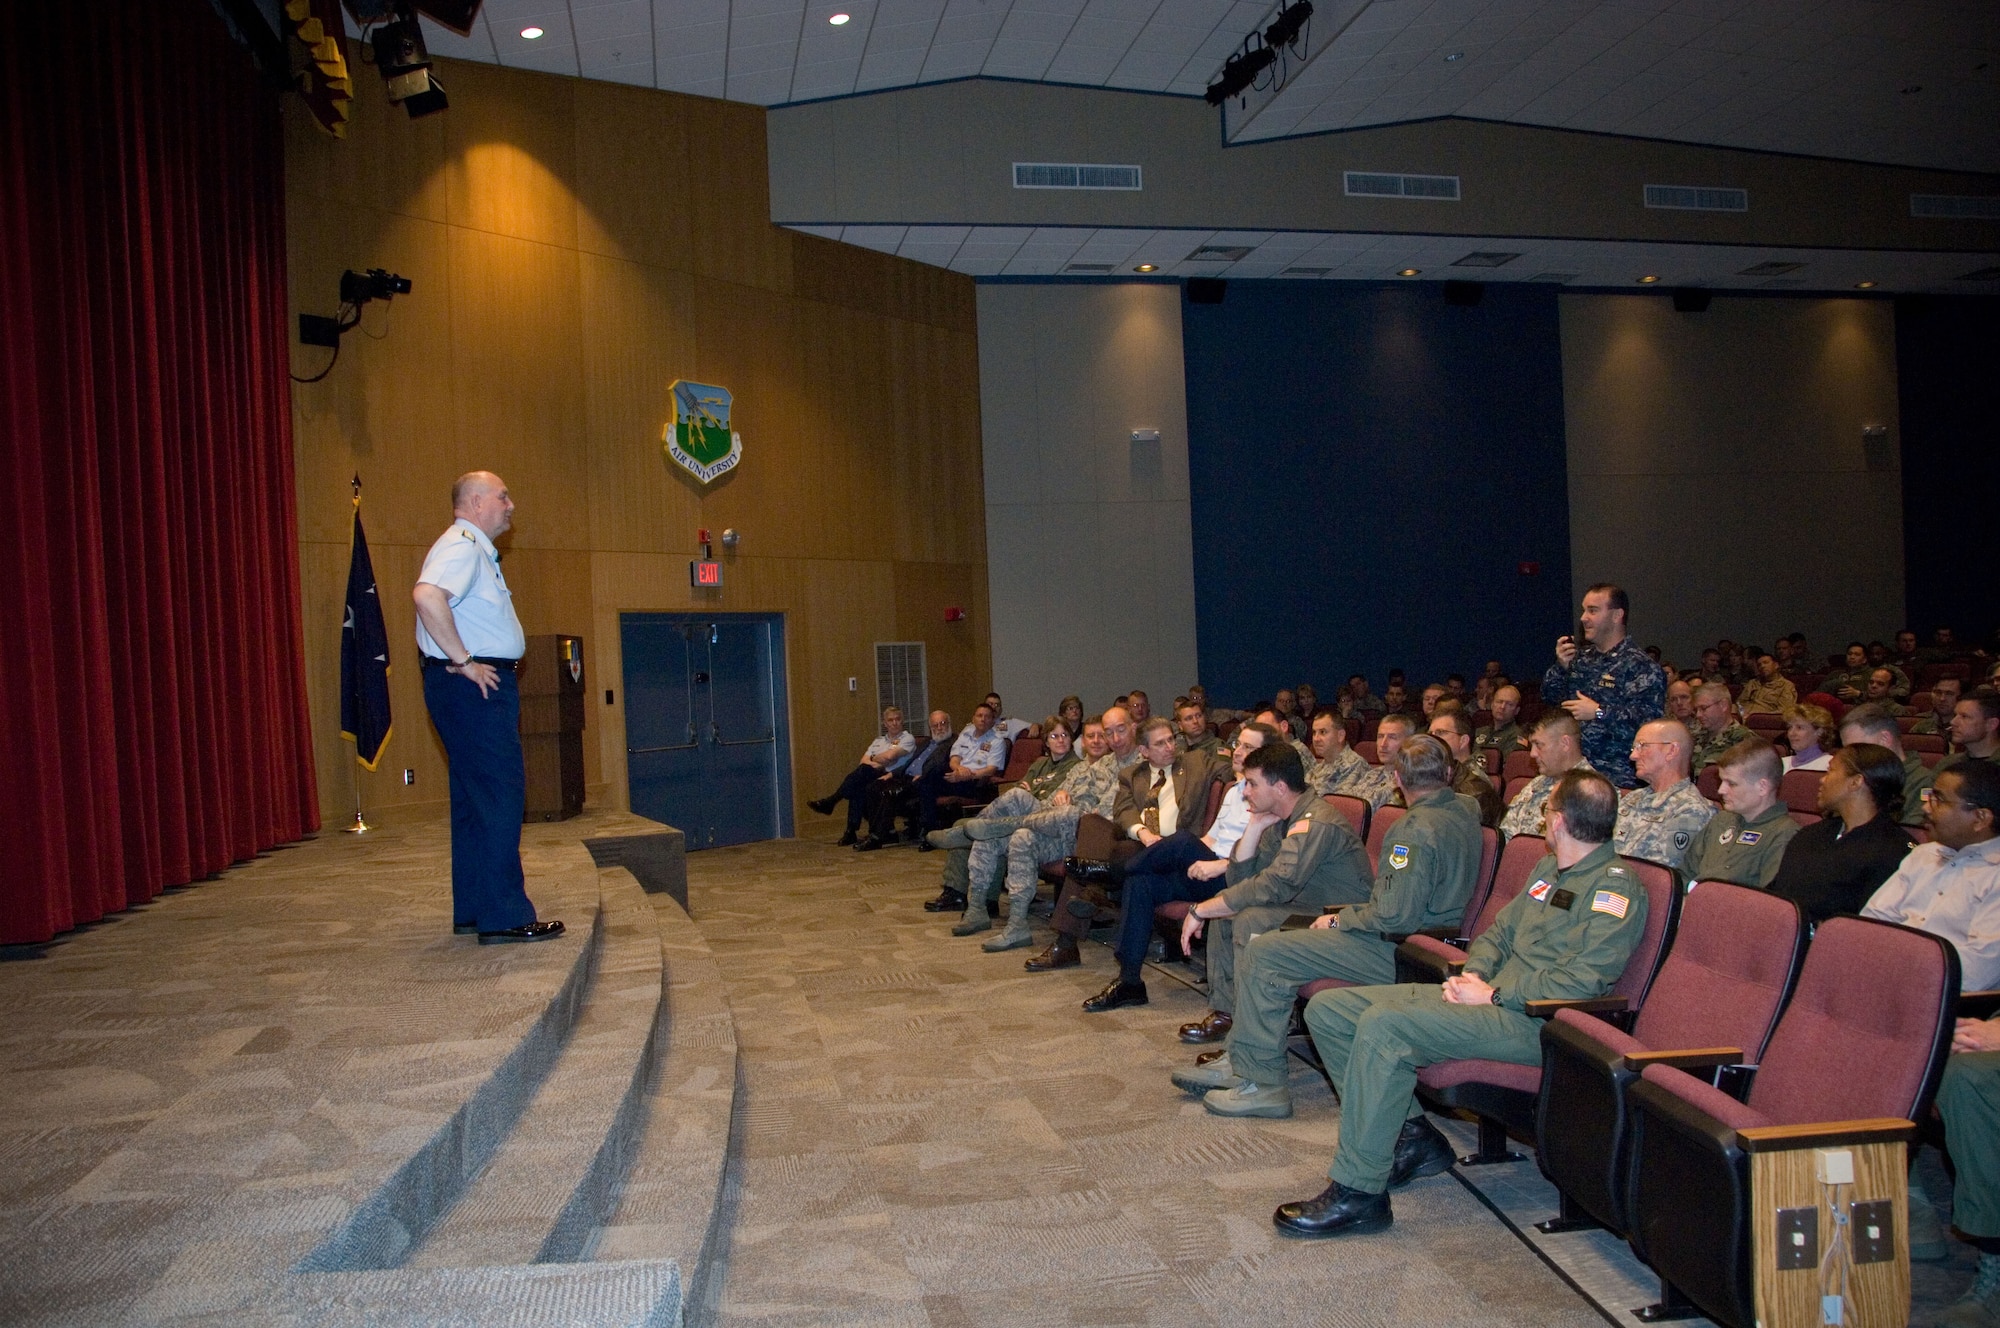 Adm. Thad Allen, commandant of the U.S. Coast Guard, addresses Air War
College students April 9 about Homeland Security. The admiral's address was
part of the Distinguished Lecture Series that Air War College provides its
students in order to educate them on leadership. Under the program, leaders
from across a wide range of disciplines, including diplomats and scholars,
speak on a regular basis to Air War College classes. (U.S. Air Force photo by Melanie Rodgers Cox)